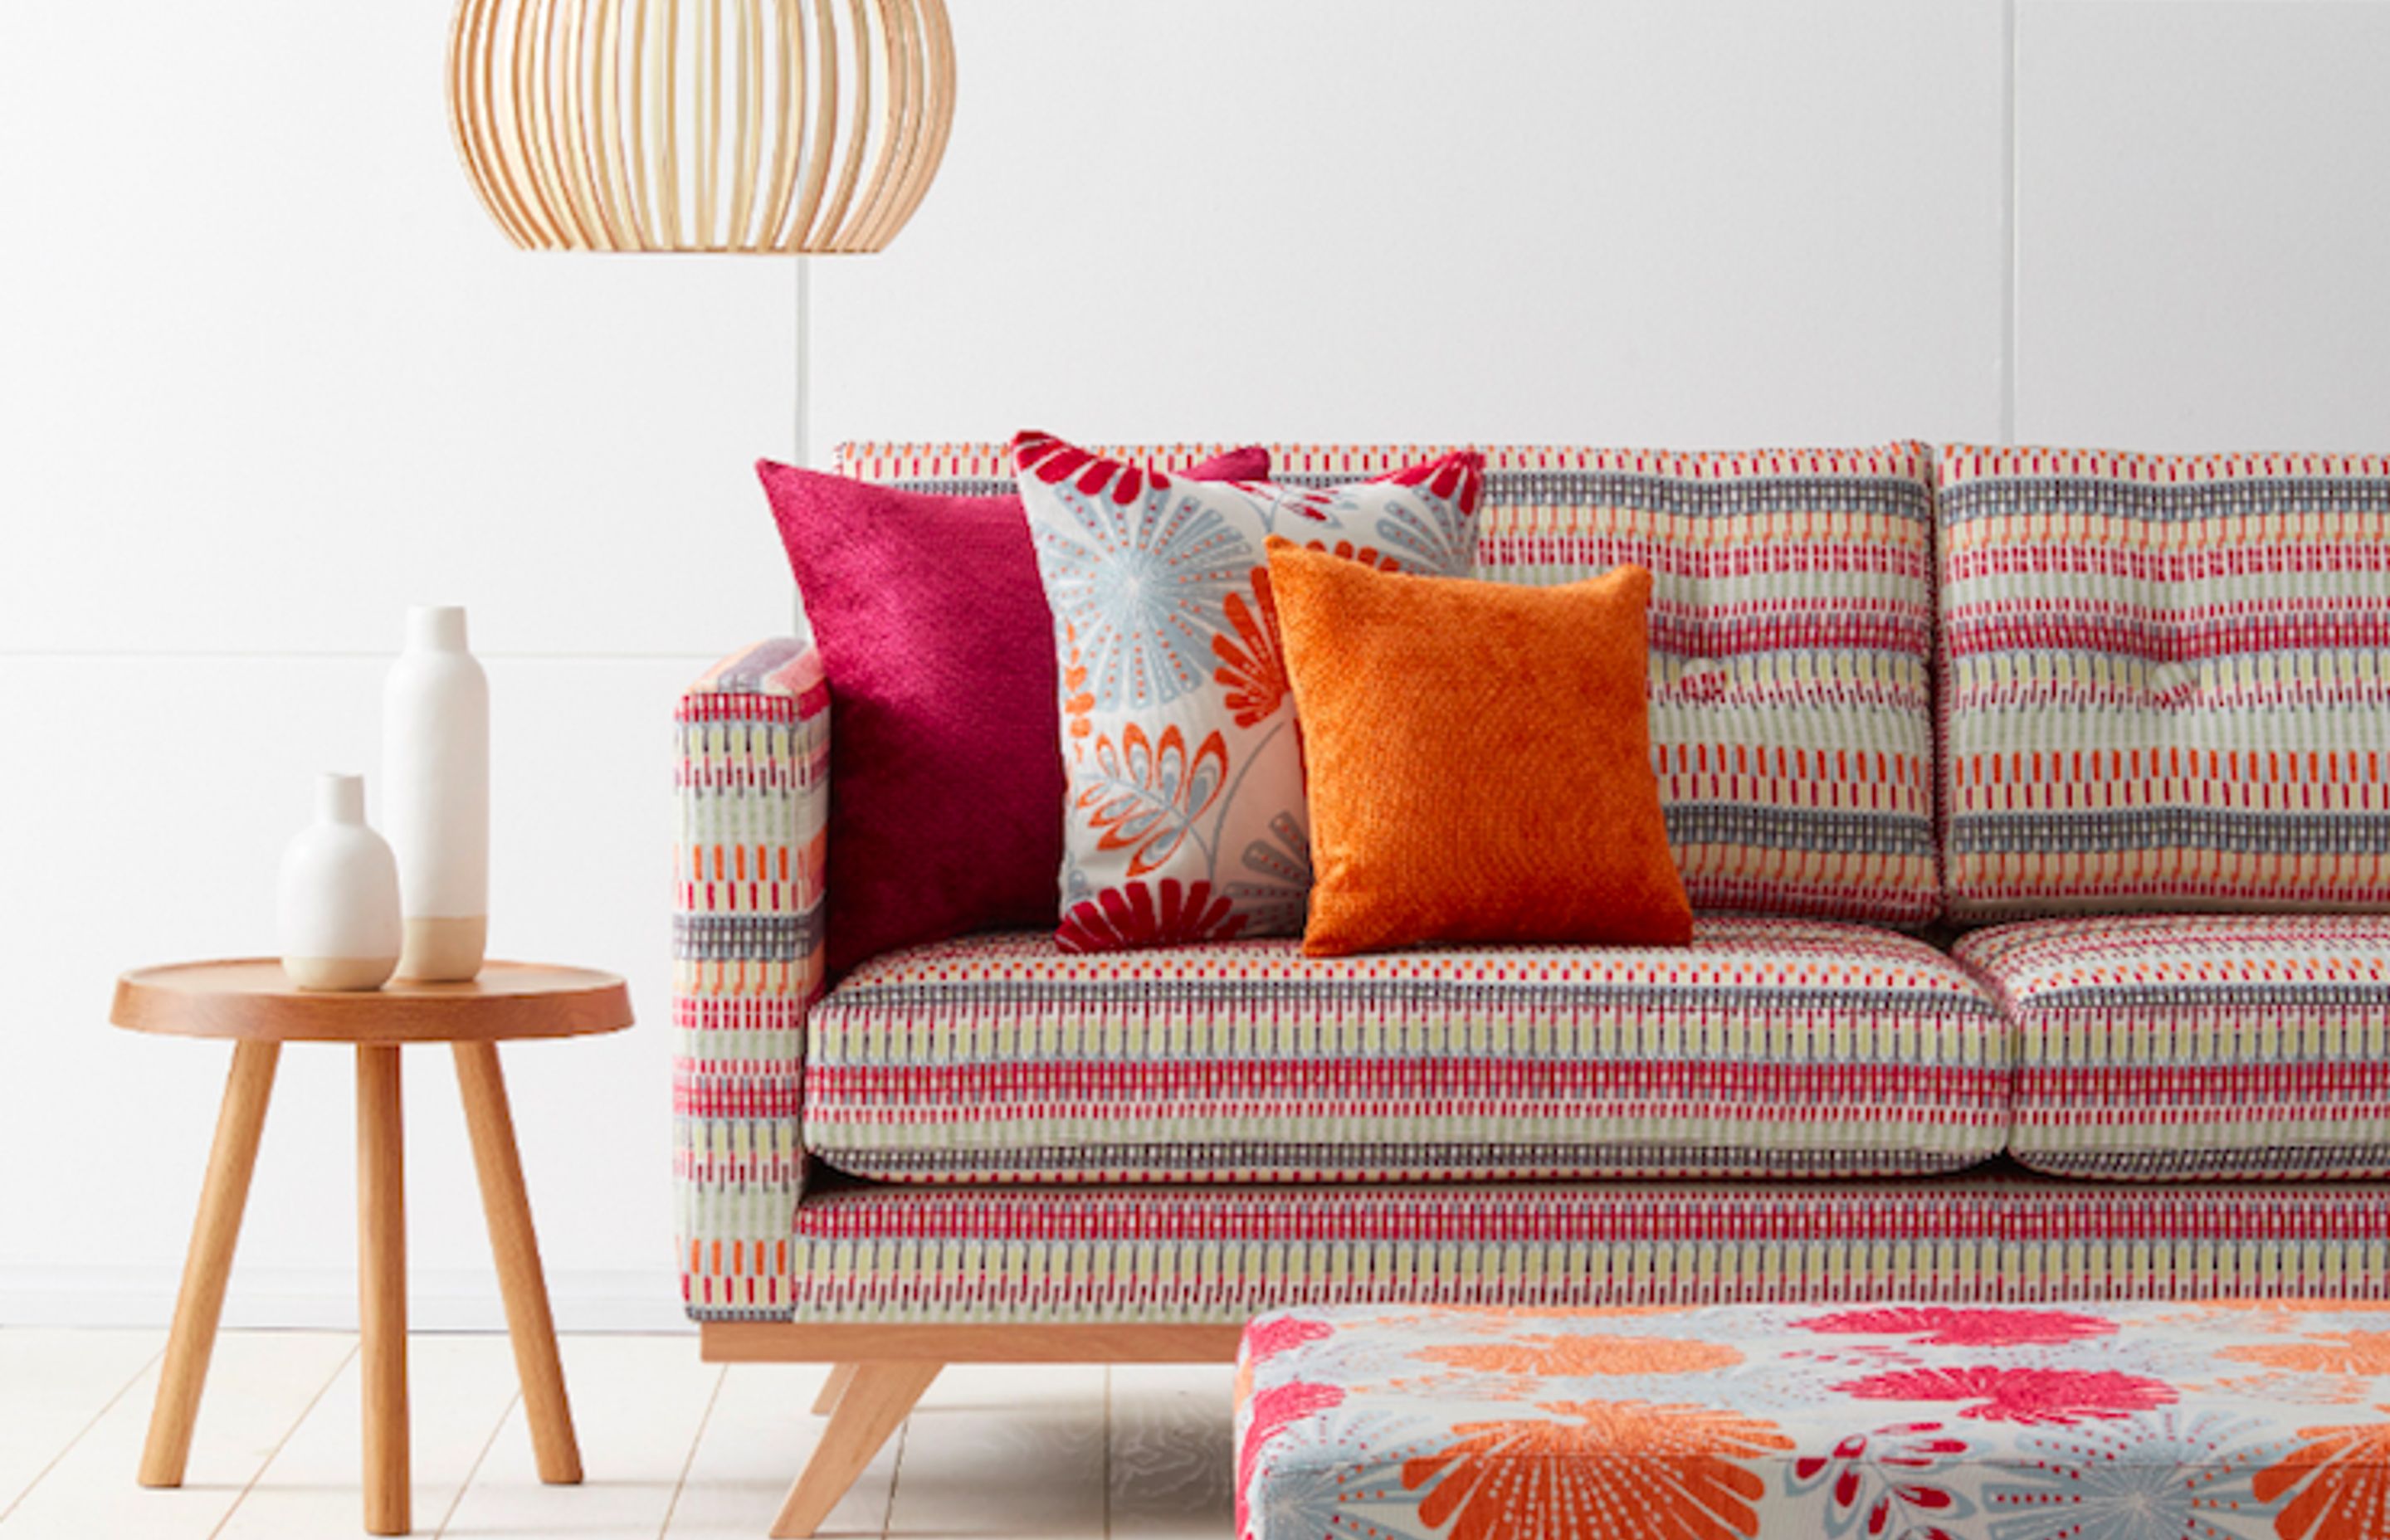 Patterns, textures and bold colour work harmoniously